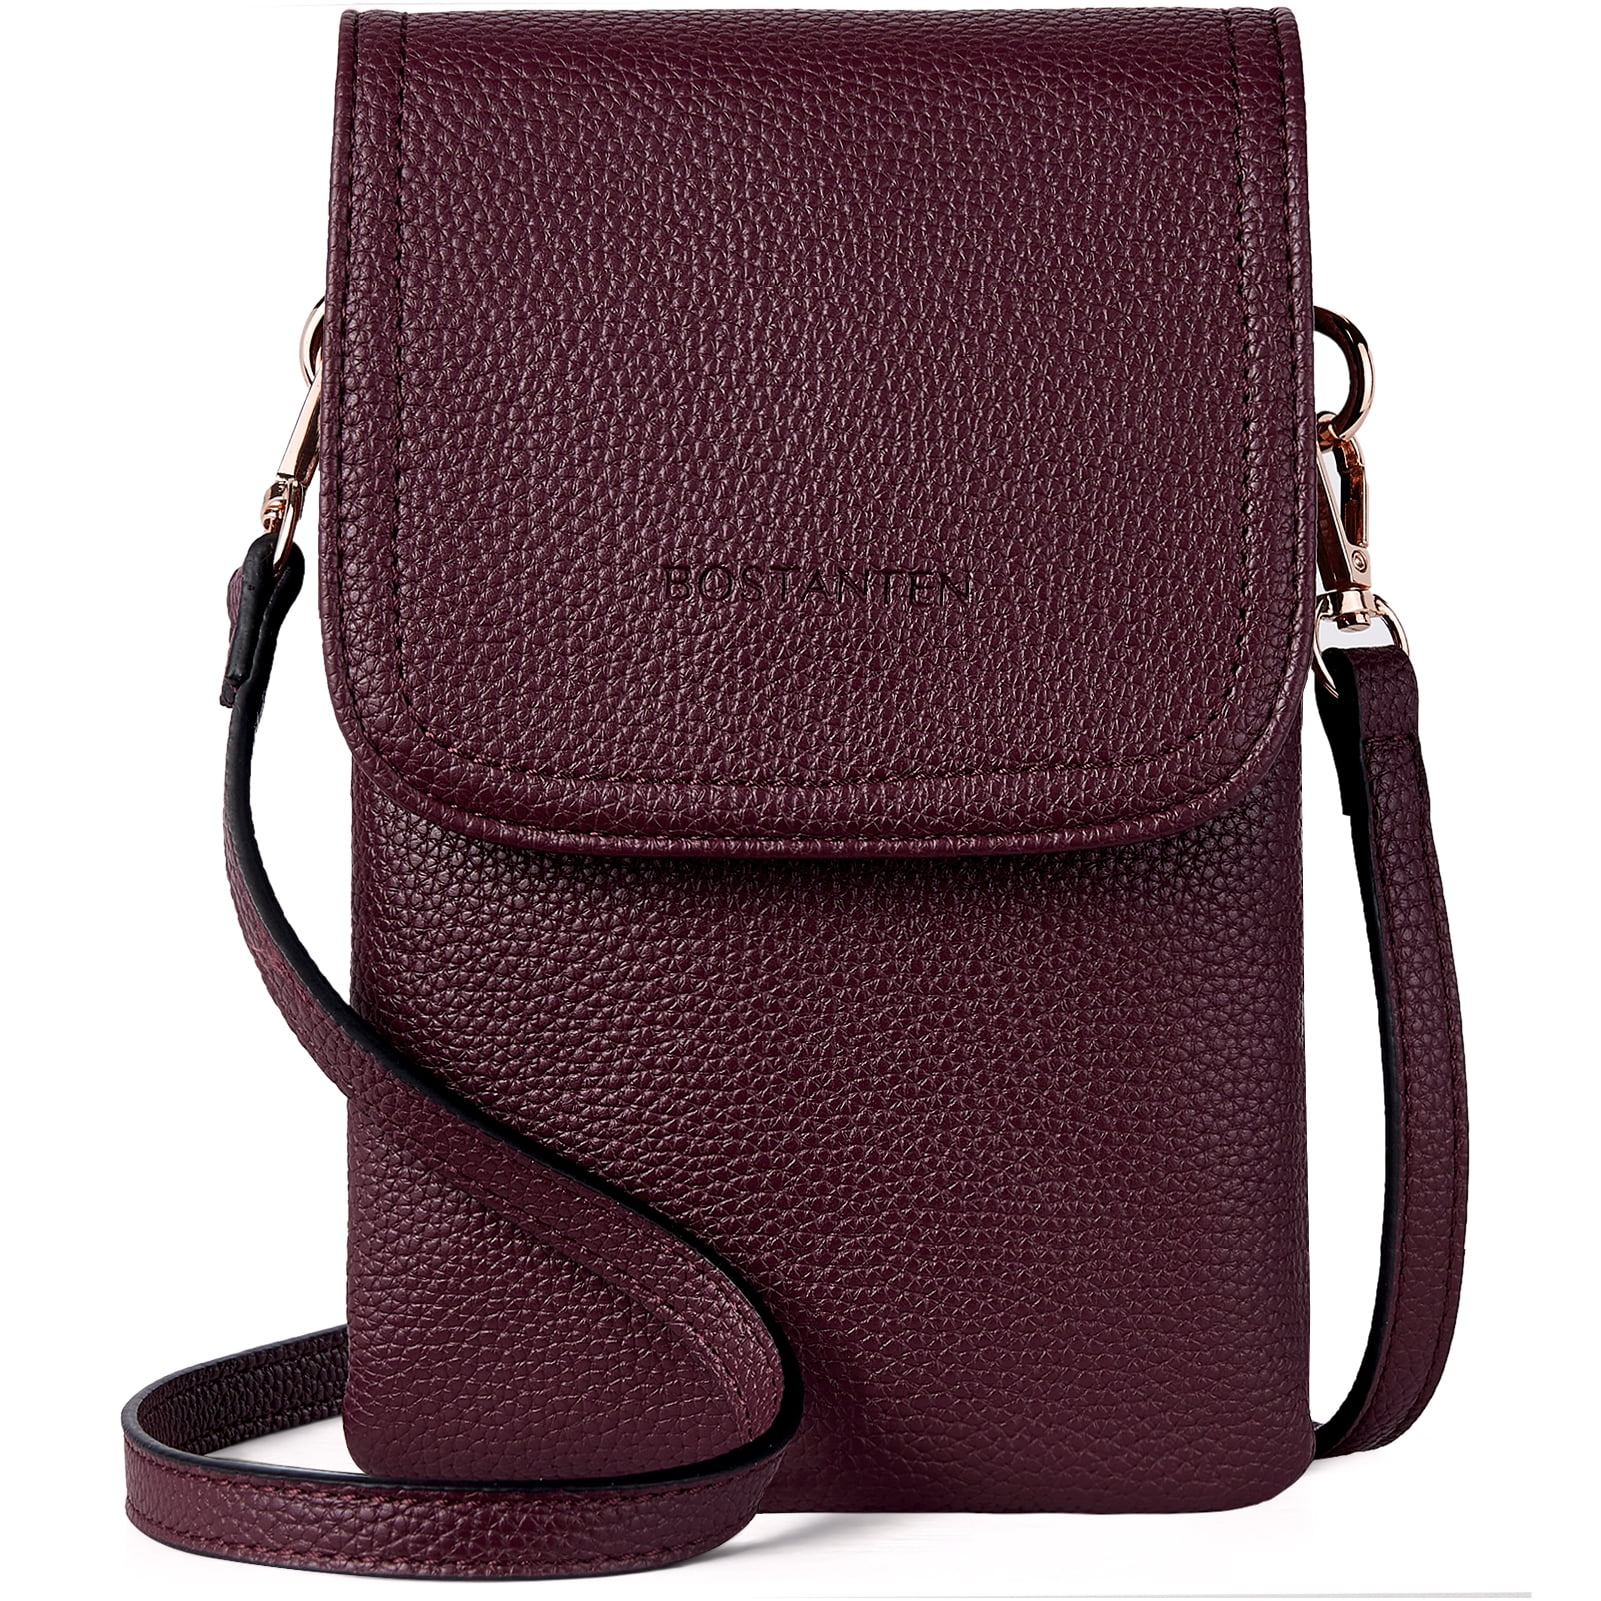 BOSTANTEN Leather Crossbody Bags for Women Cell Phone Purse Bag Adjustable Strap f50e1b9f 1d27 4435 a42a 850bf23560b6.53a3f8d3180080459ee36c1ec4942749